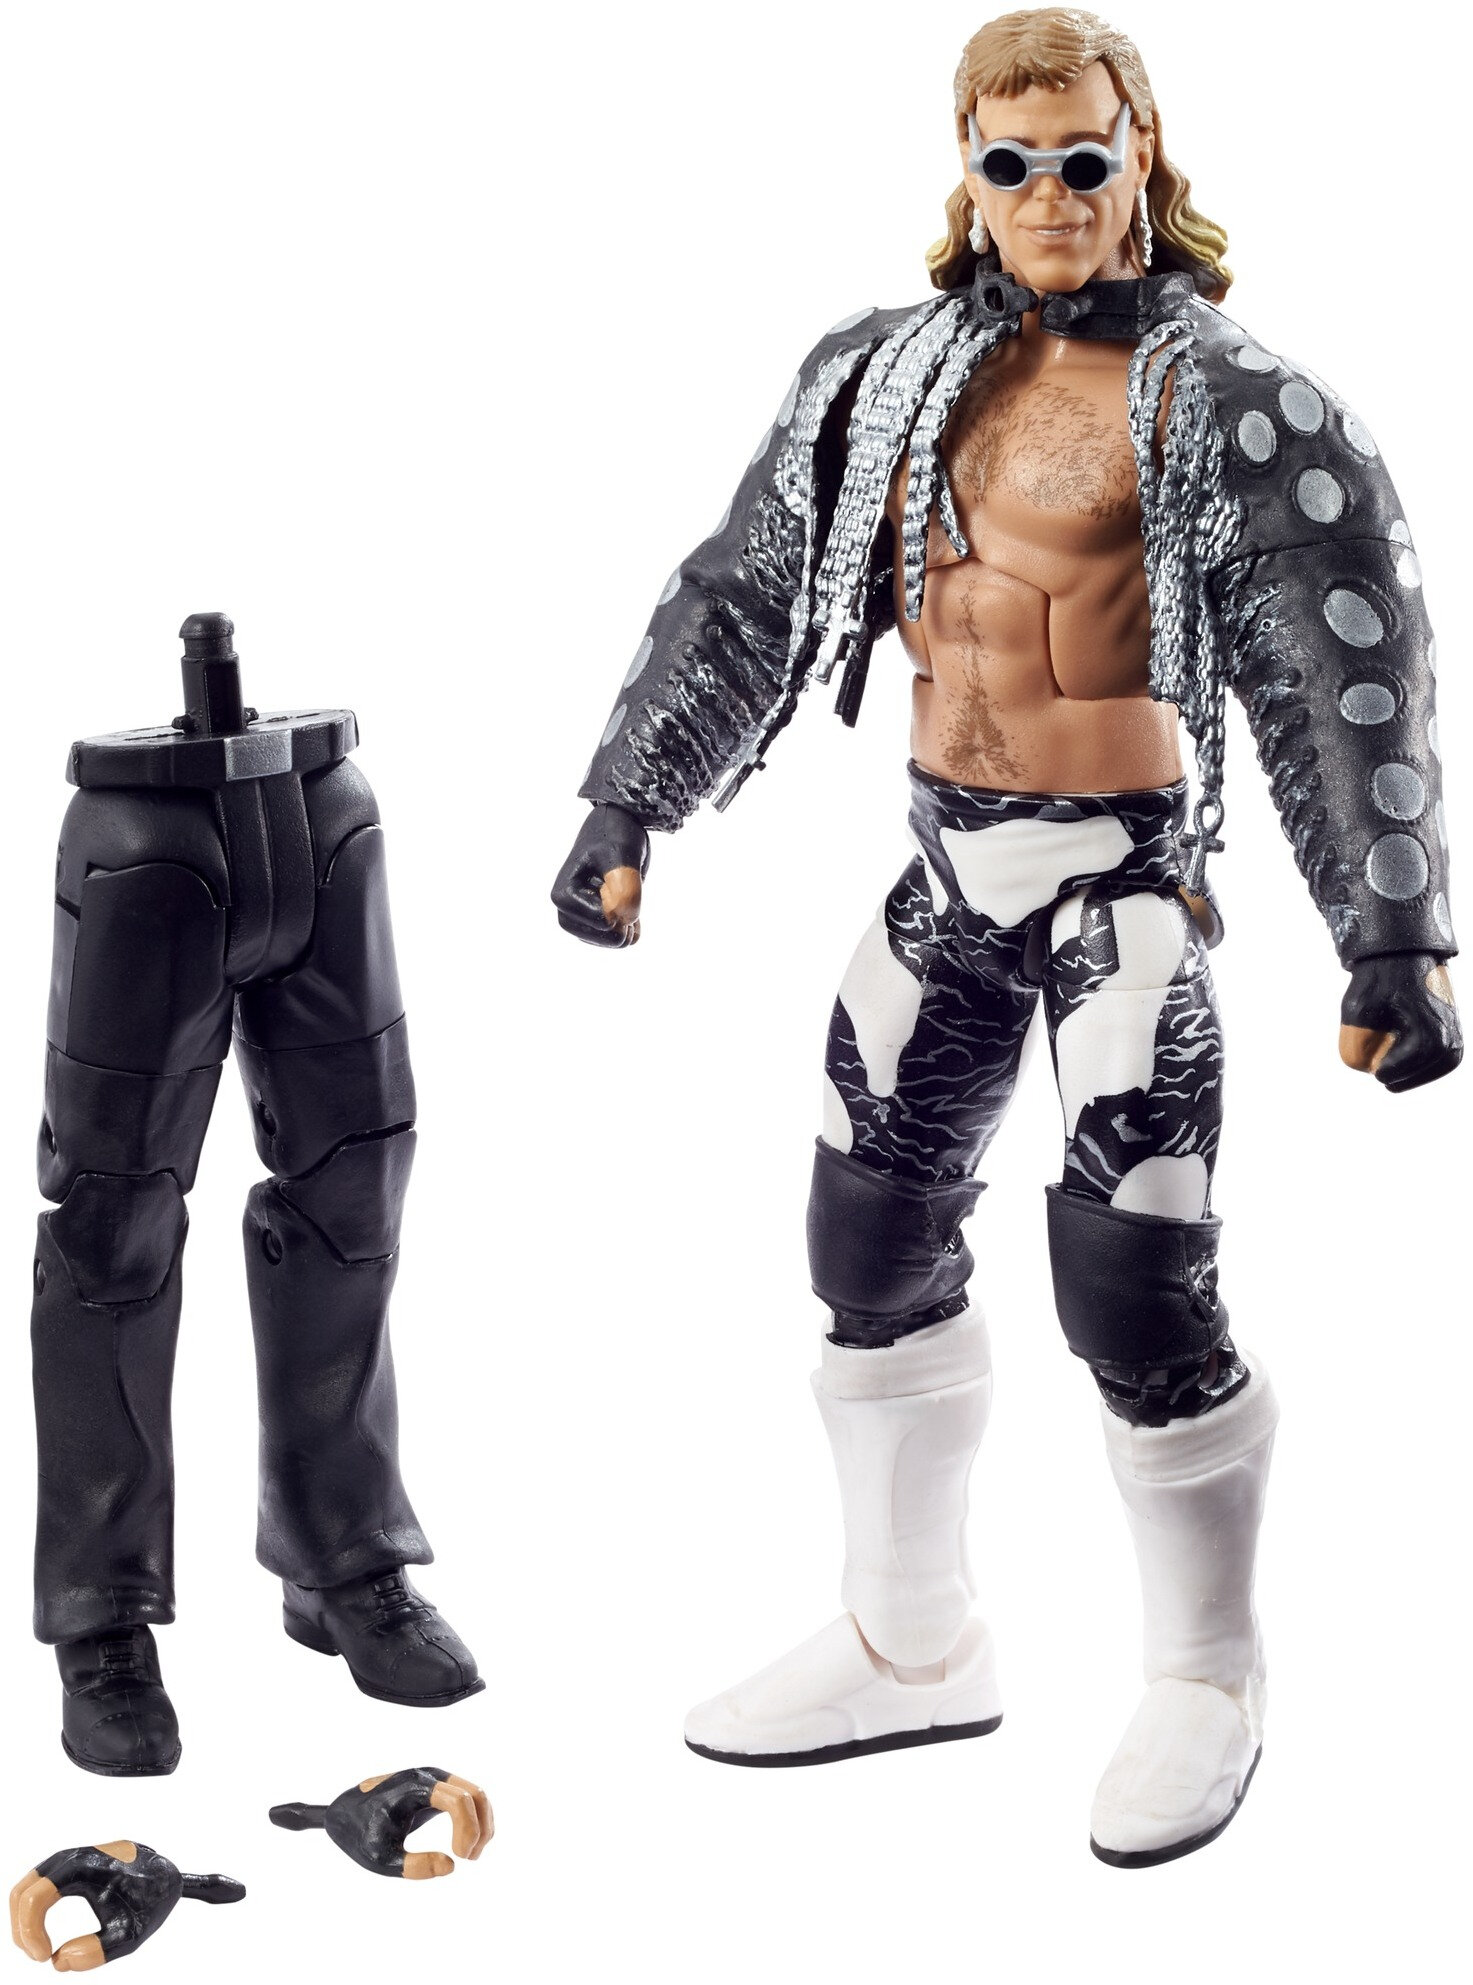 WWE Wrestlemania Shawn Michaels Action Figure with Accessories 